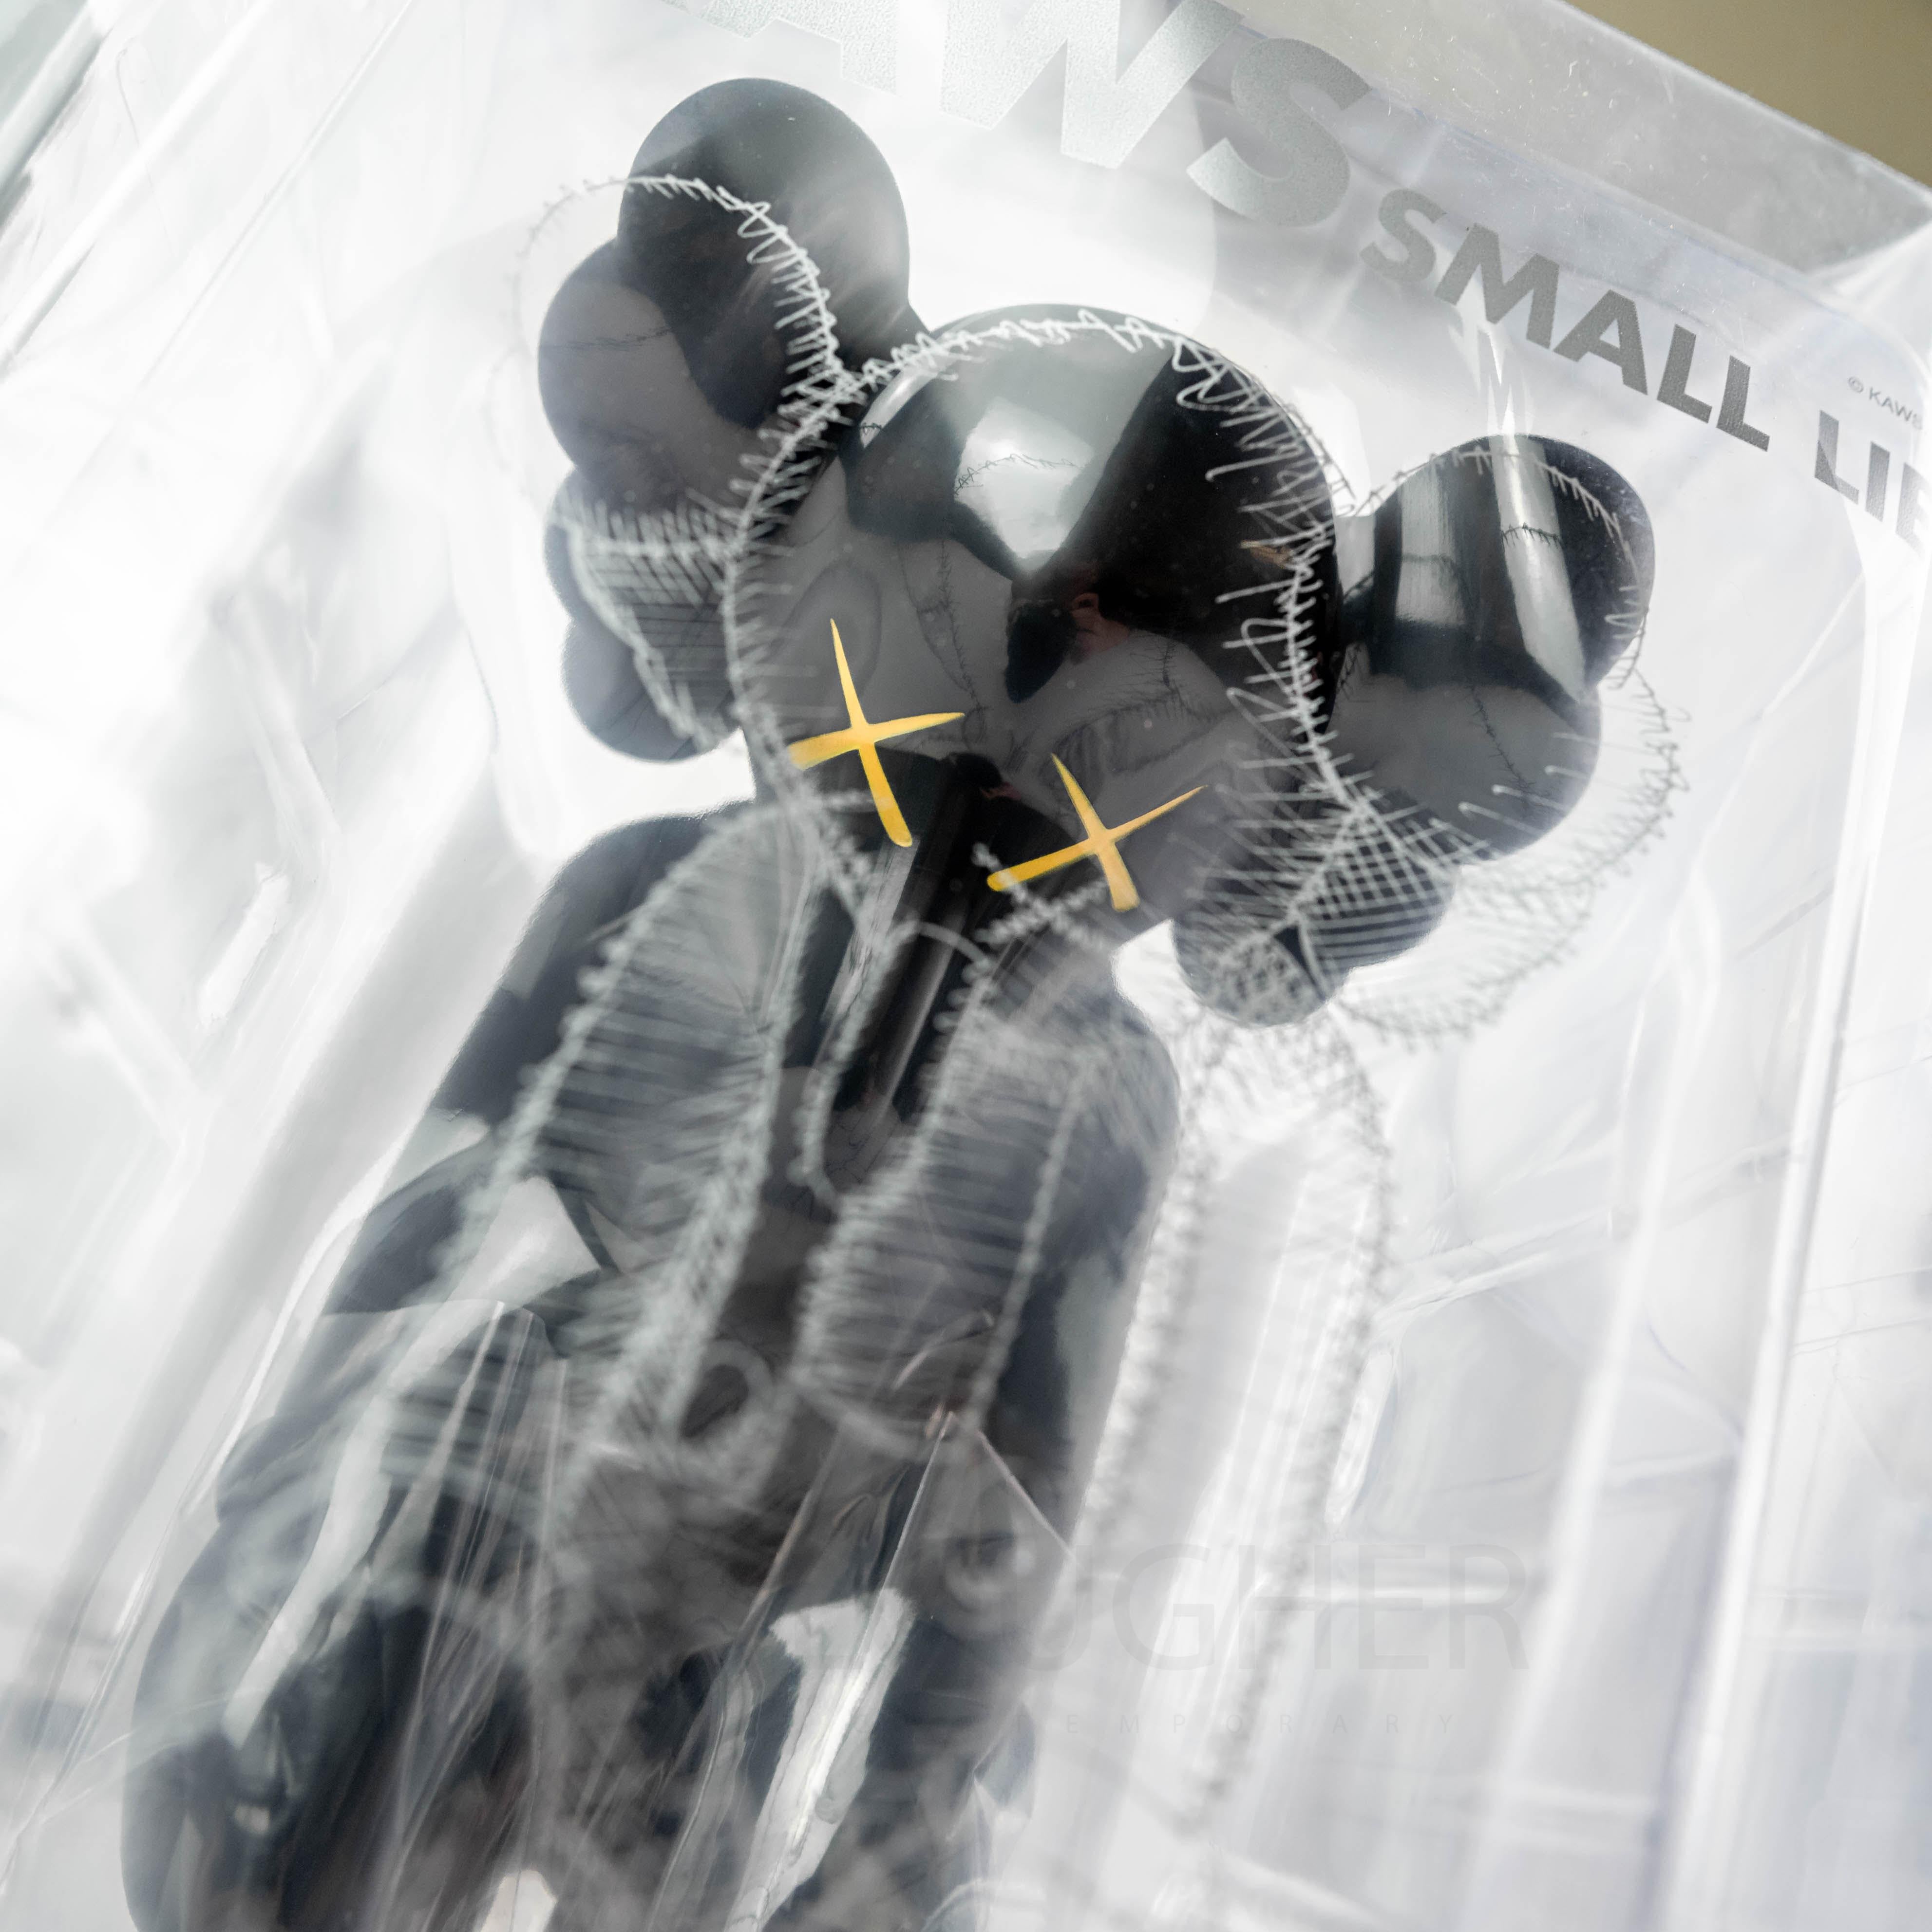 Small Lie (Set Of Three) - Sculpture by KAWS